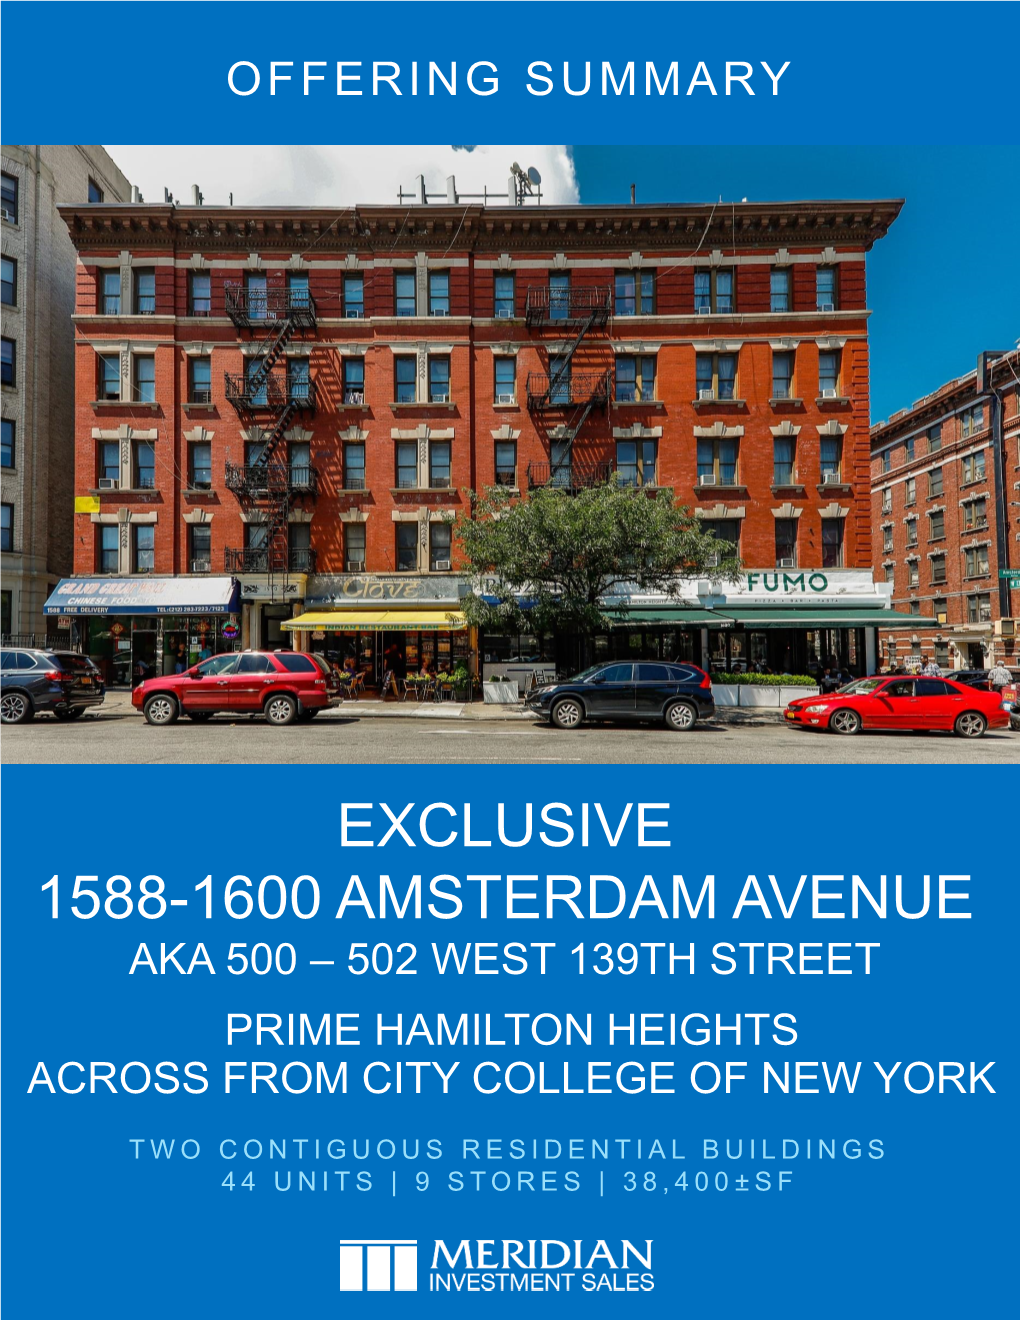 Exclusive 1588-1600 Amsterdam Avenue Aka 500 – 502 West 139Th Street Prime Hamilton Heights Across from City College of New York